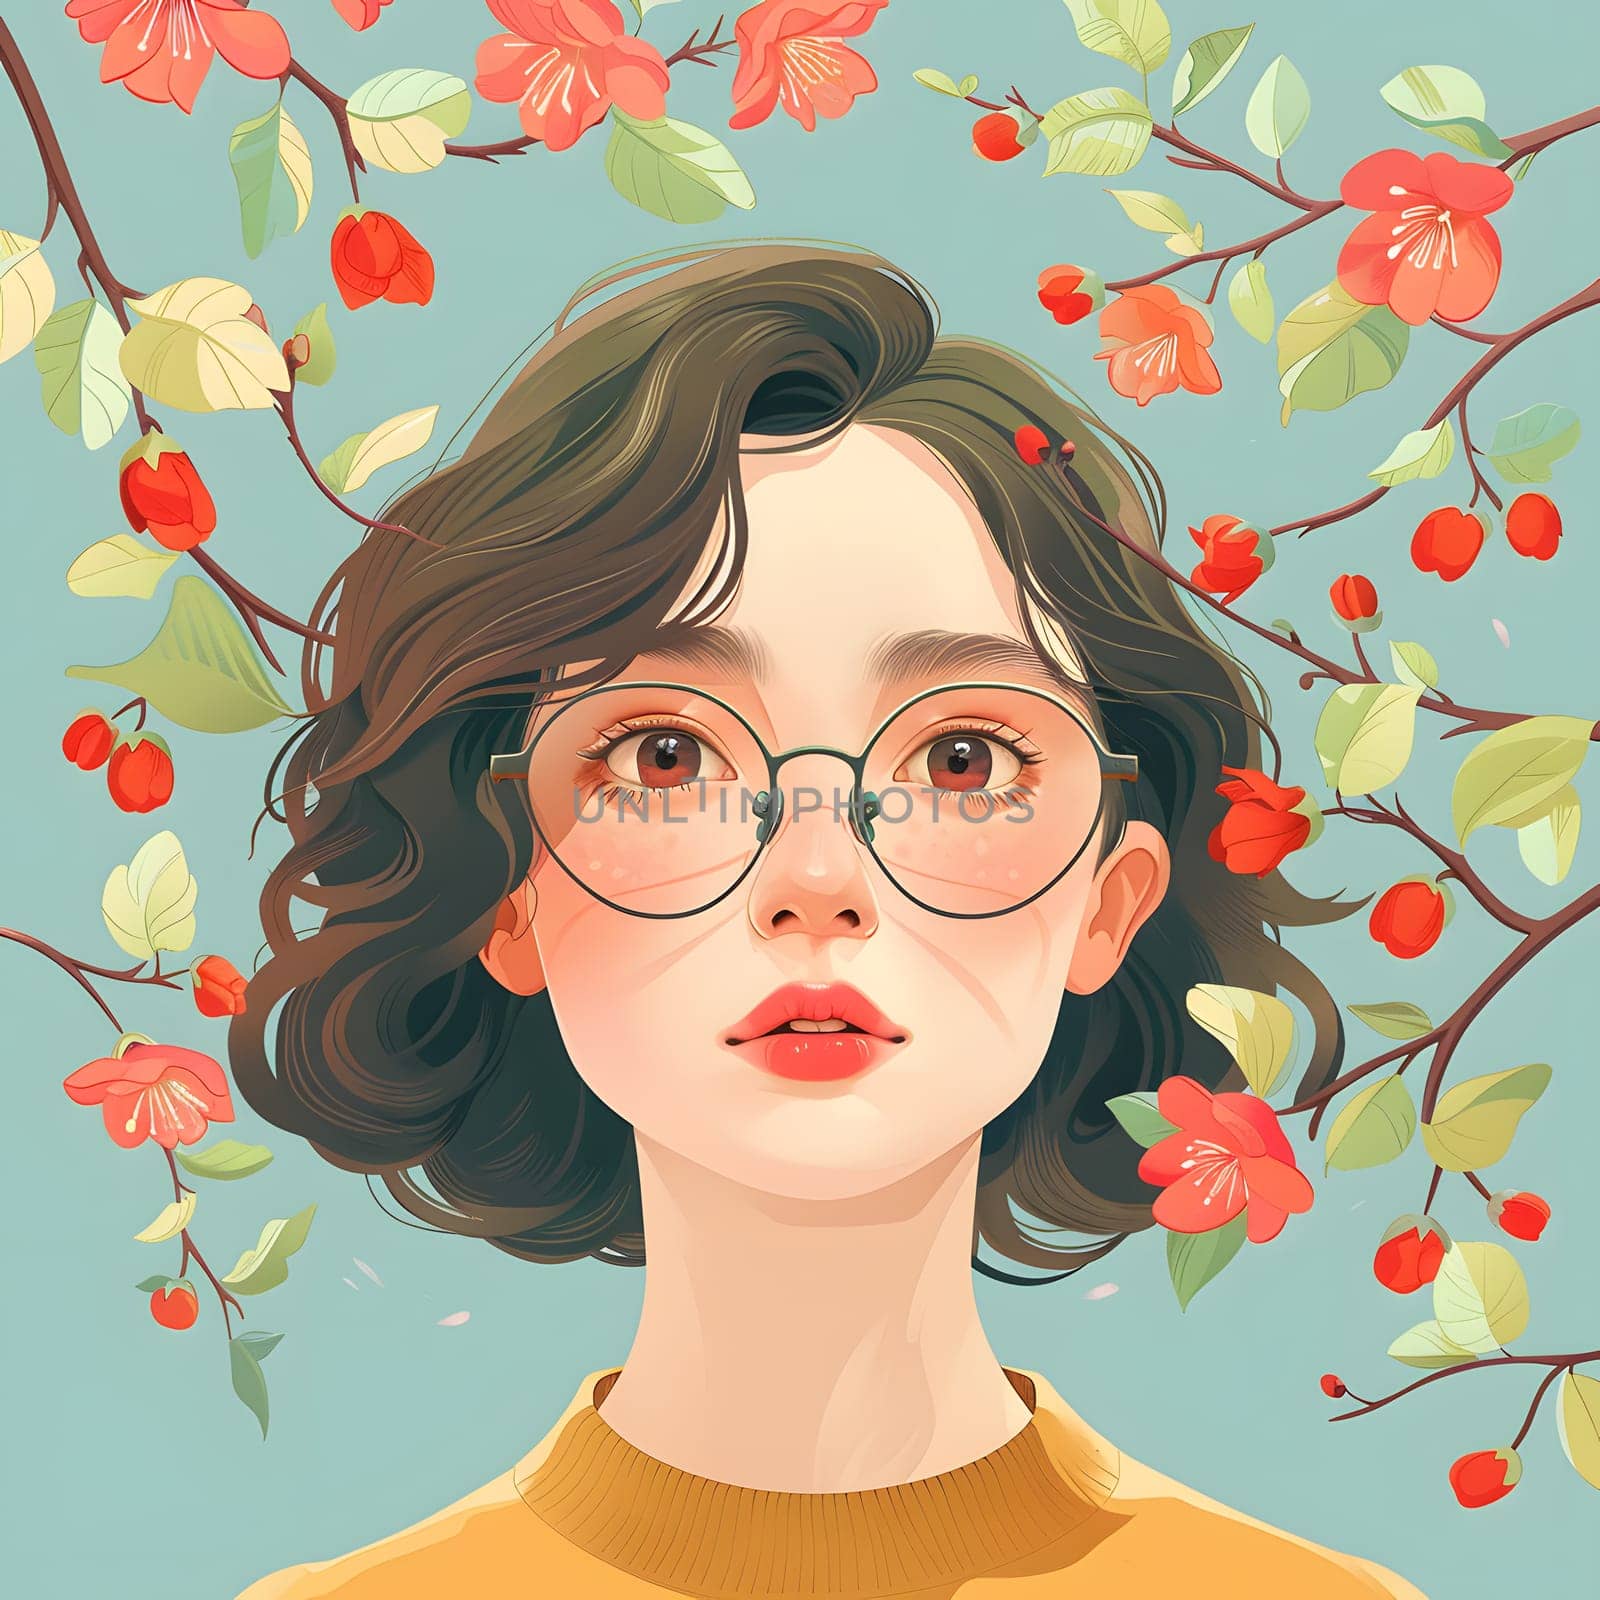 A woman with glasses and a yellow shirt has a face adorned with flowers. The plants provide a colorful contrast to her hair, cheeks, lips, and head